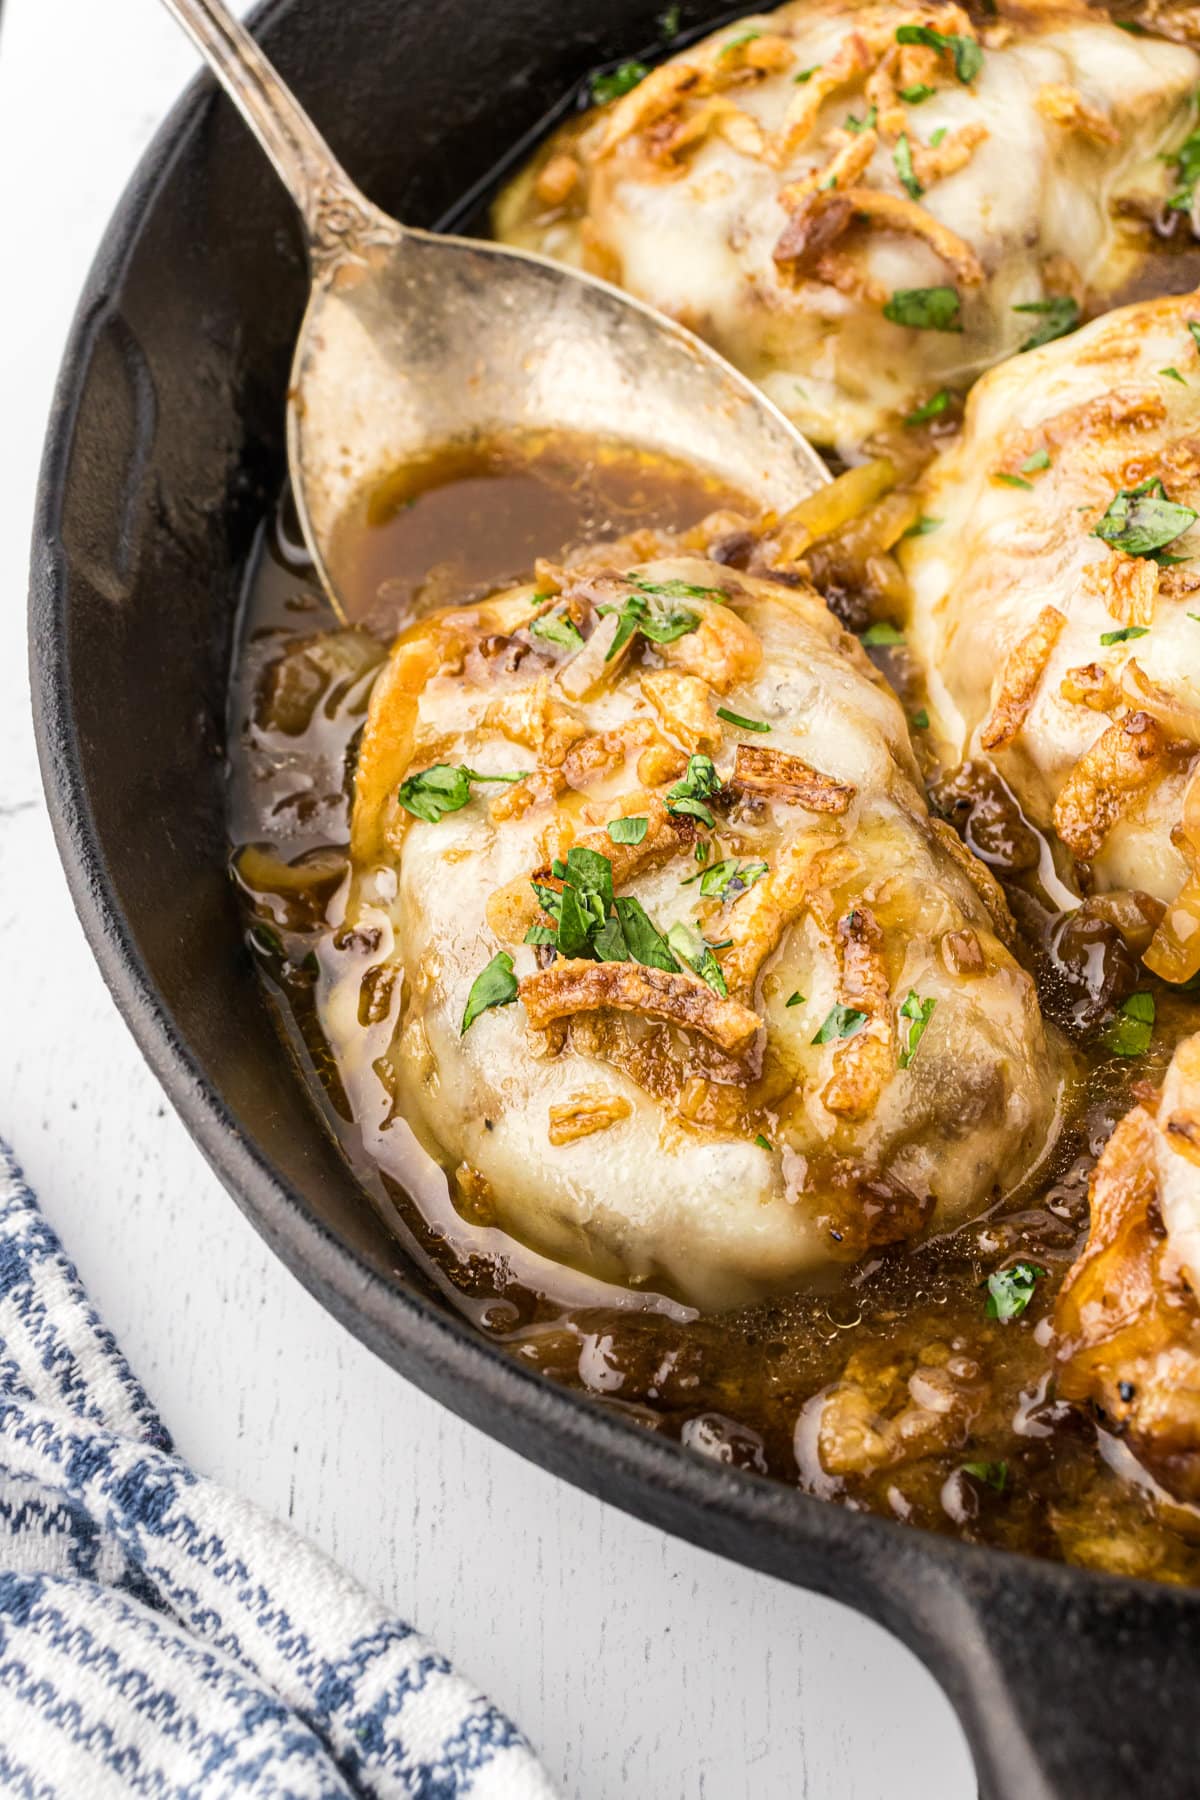 Cheesy French onion pork chops shown up-close in a skillet.